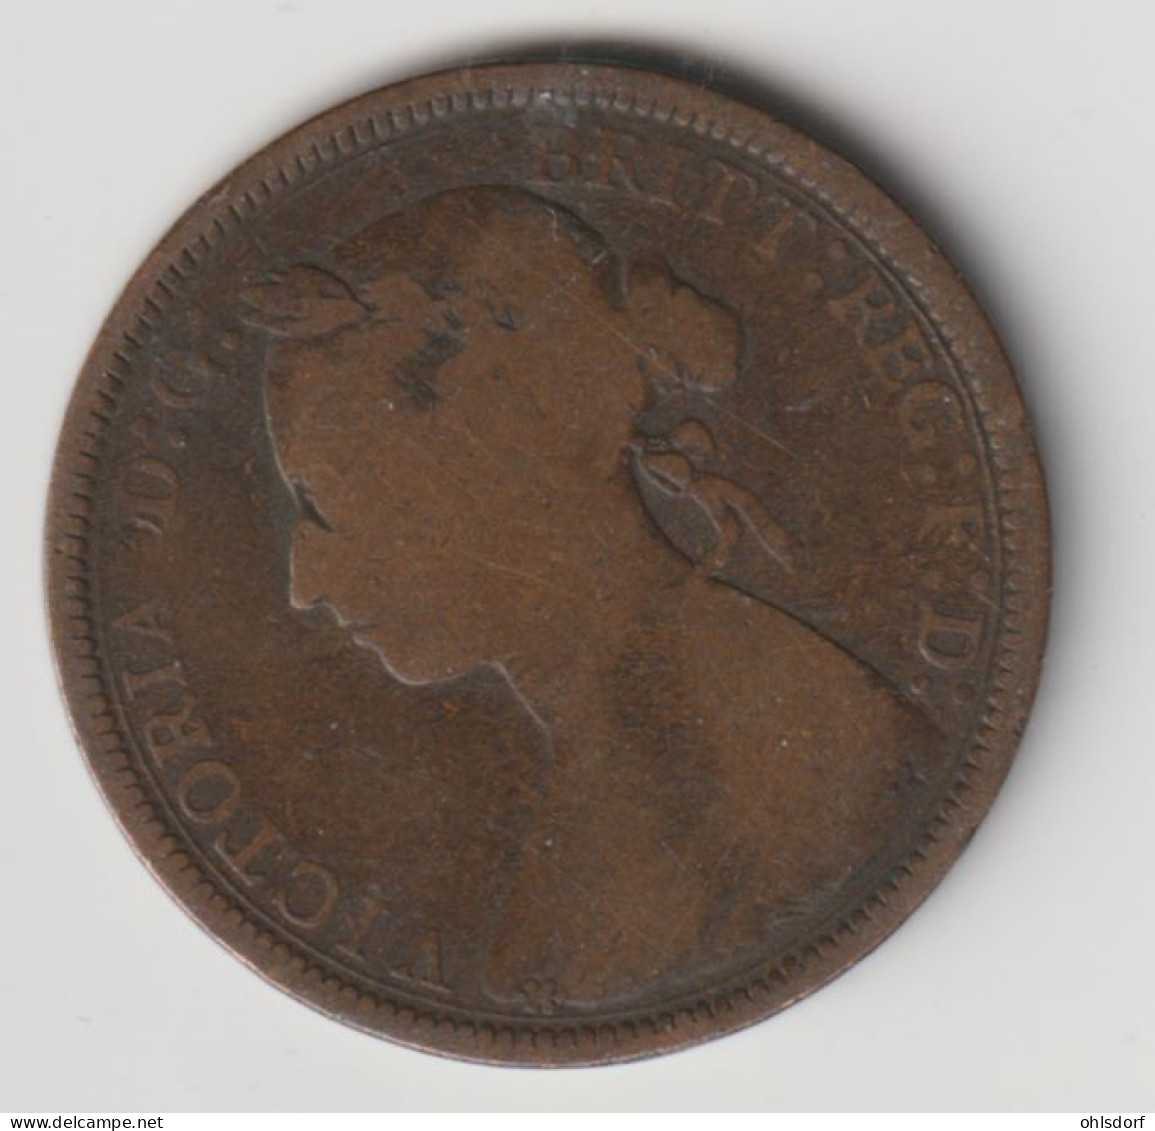 GREAT BRITAIN 1891: 1/2 Penny, KM 754 - C. 1/2 Penny